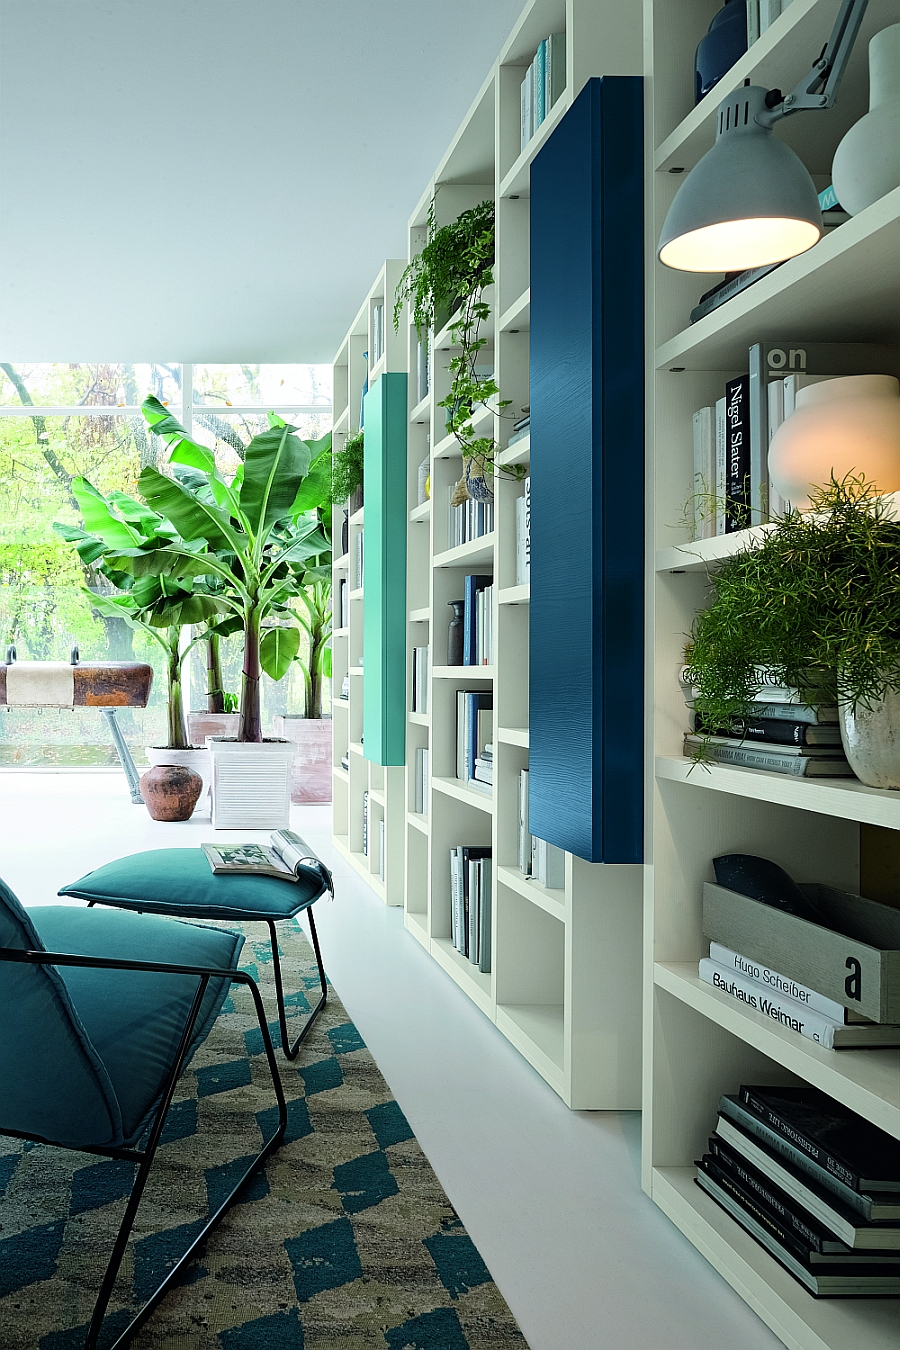 Natural greenery adds to the vibrant style of the wall unit system